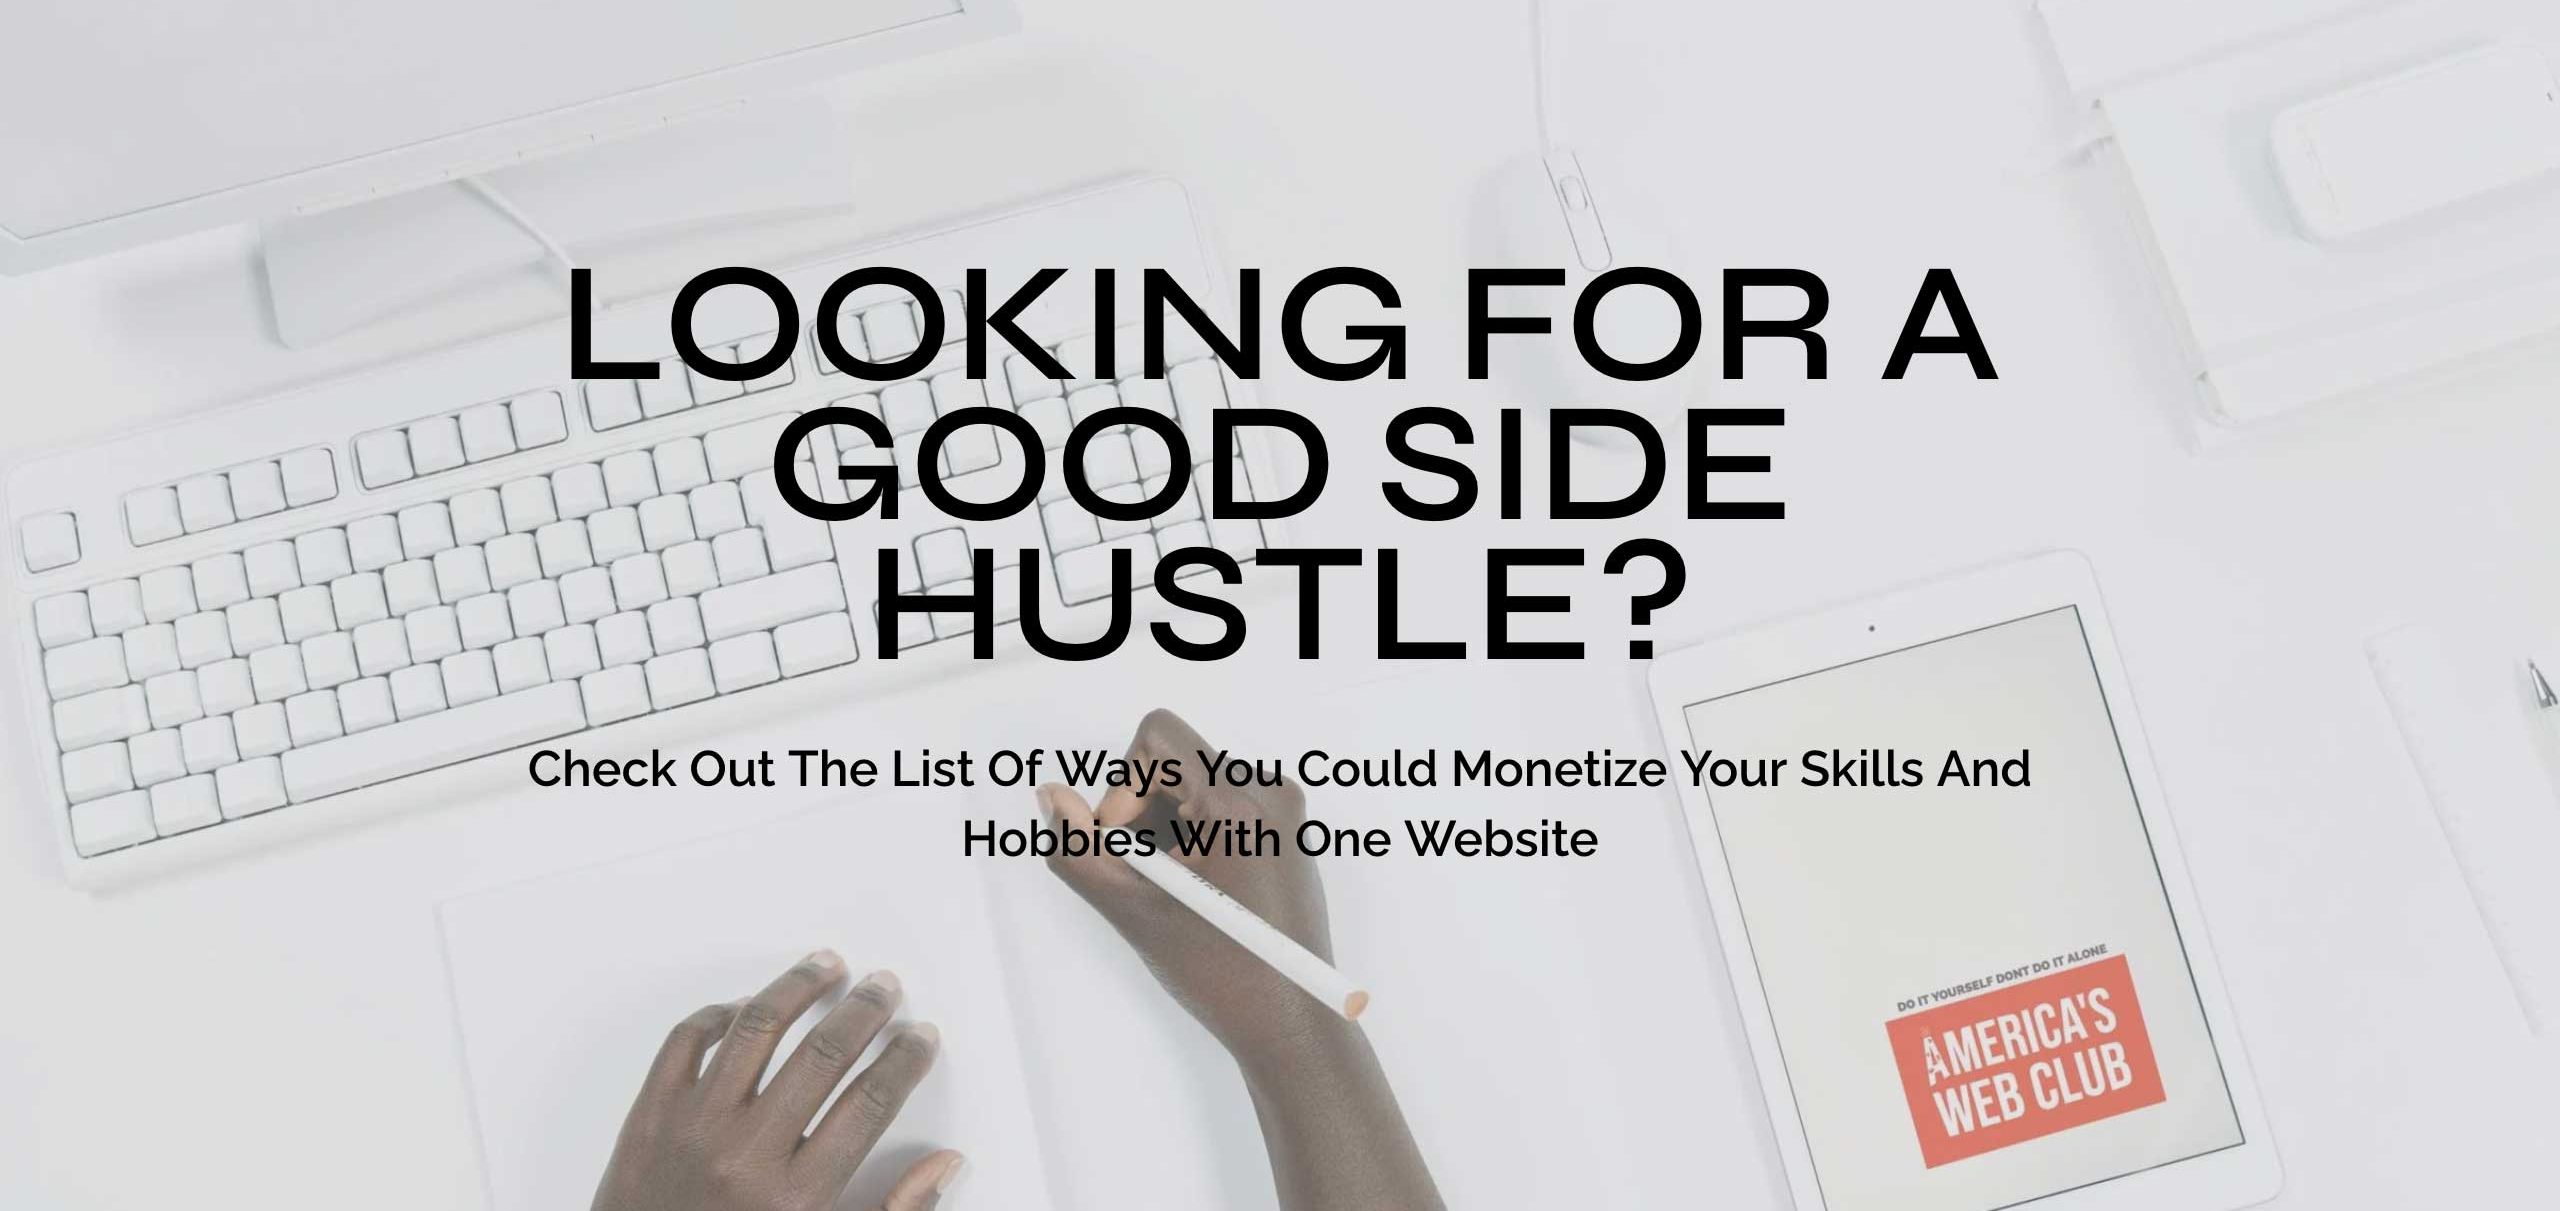 Are You Looking For a Good Side Hustle? America's Web Club Builds Side Hustles